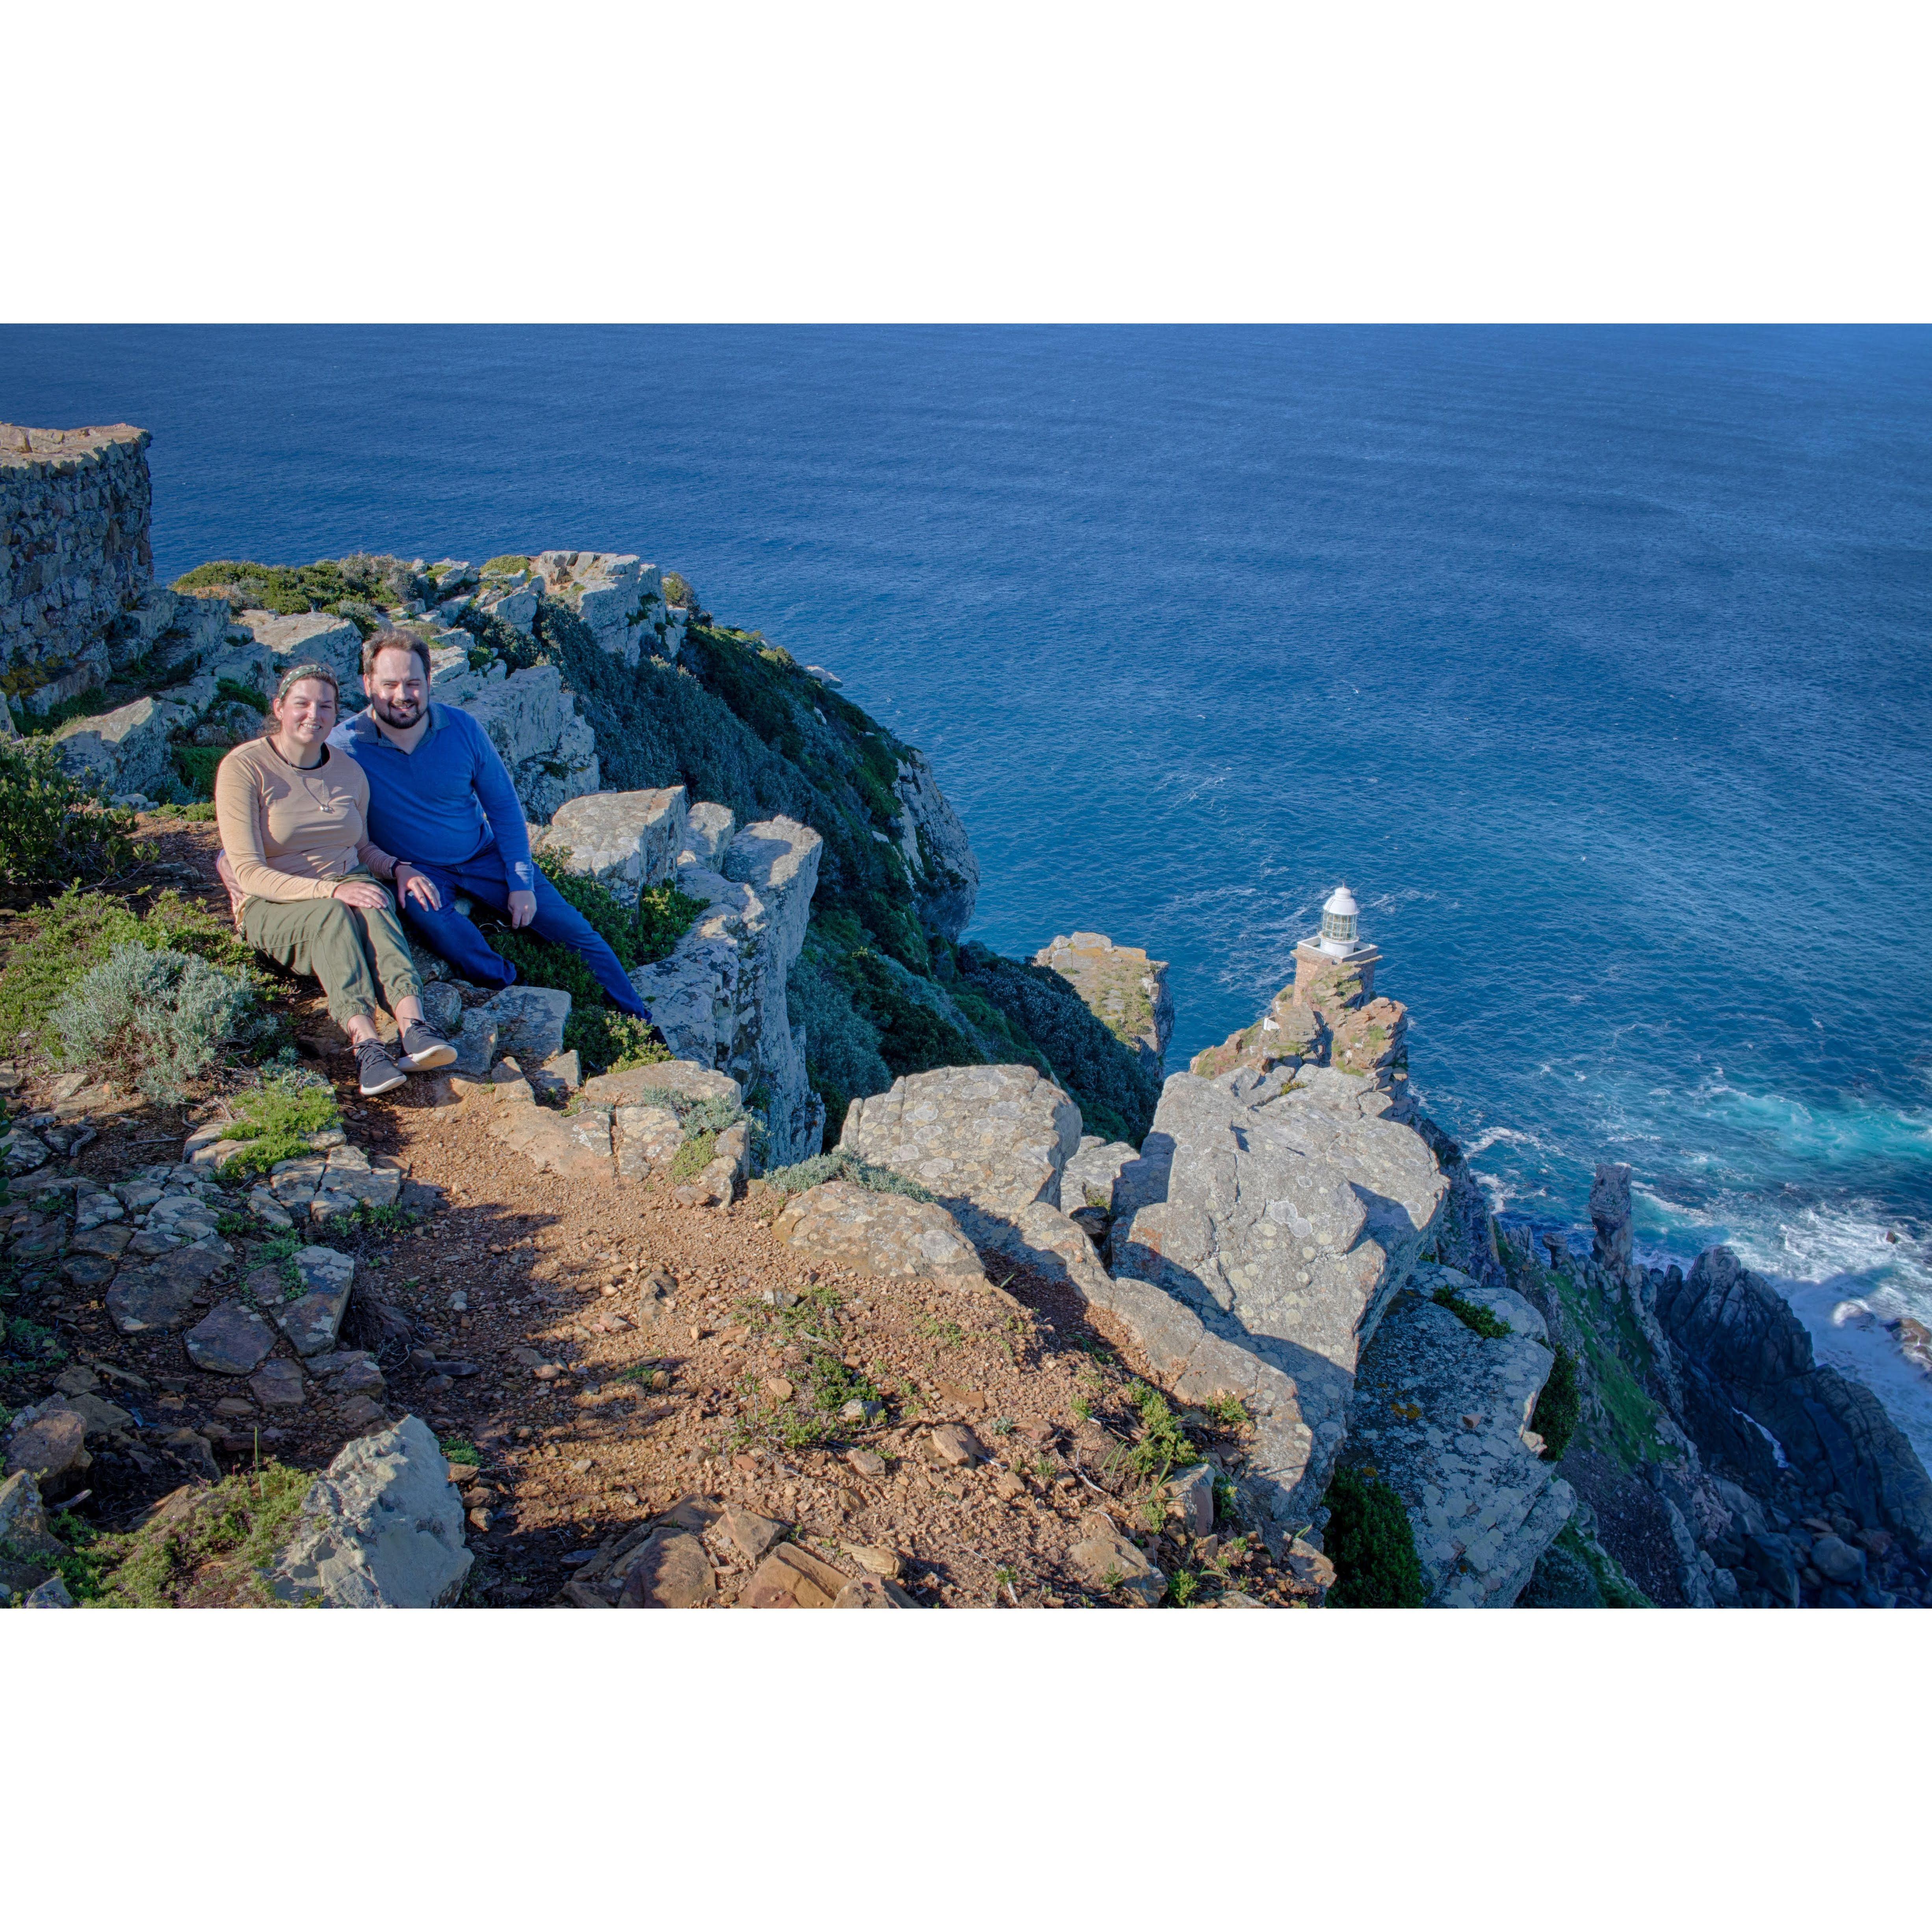 The beautiful engagement view!
Cape Point, SA 
July 2022